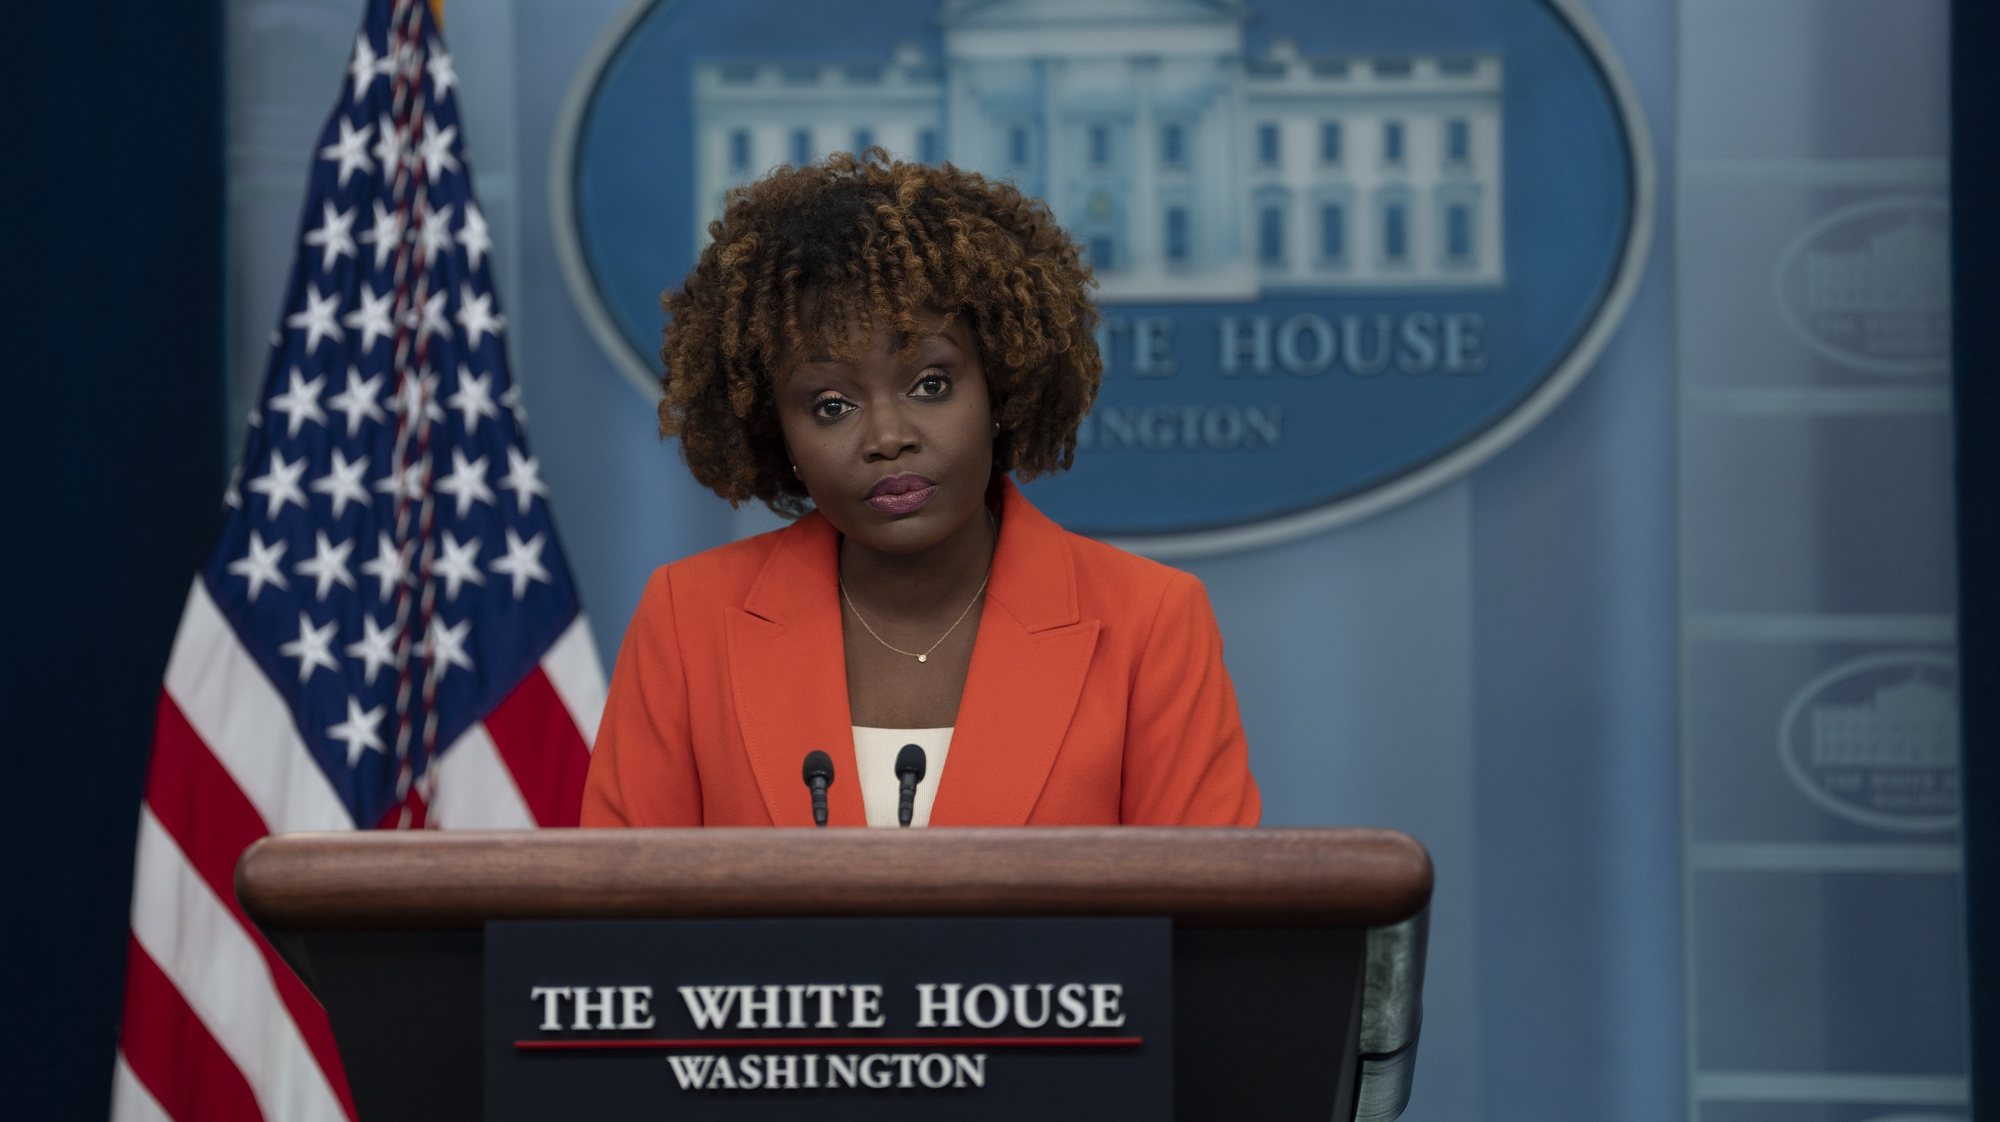 epa10486250 White House Press Secretary Karine Jean-Pierre participates in a news briefing at the White House in Washington, DC, USA, 23 February 2023.









































United States President Joe Biden and first lady Dr. Jill Biden welcome Governors and their spouses for dinner at the White House during the winter meeting of the National Governors Association in Washington, DC on February 11, 2023.  
Credit: Chris Kleponis / Pool via CNP  EPA/CHRIS KLEPONIS / POOL